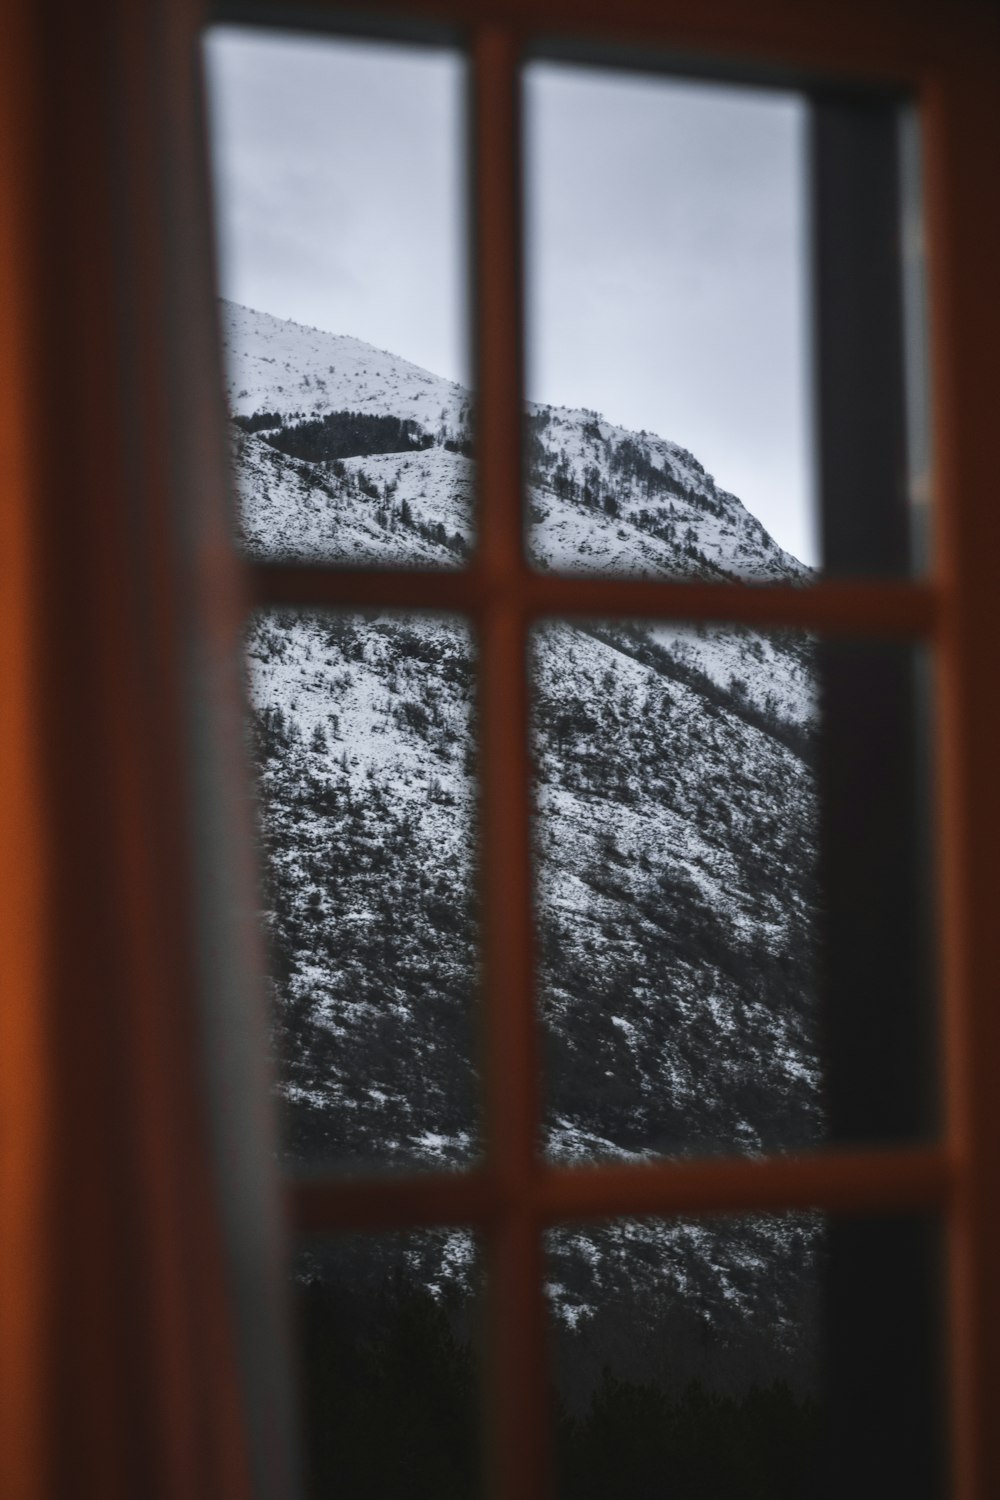 black metal window frame with snow covered mountain in distance